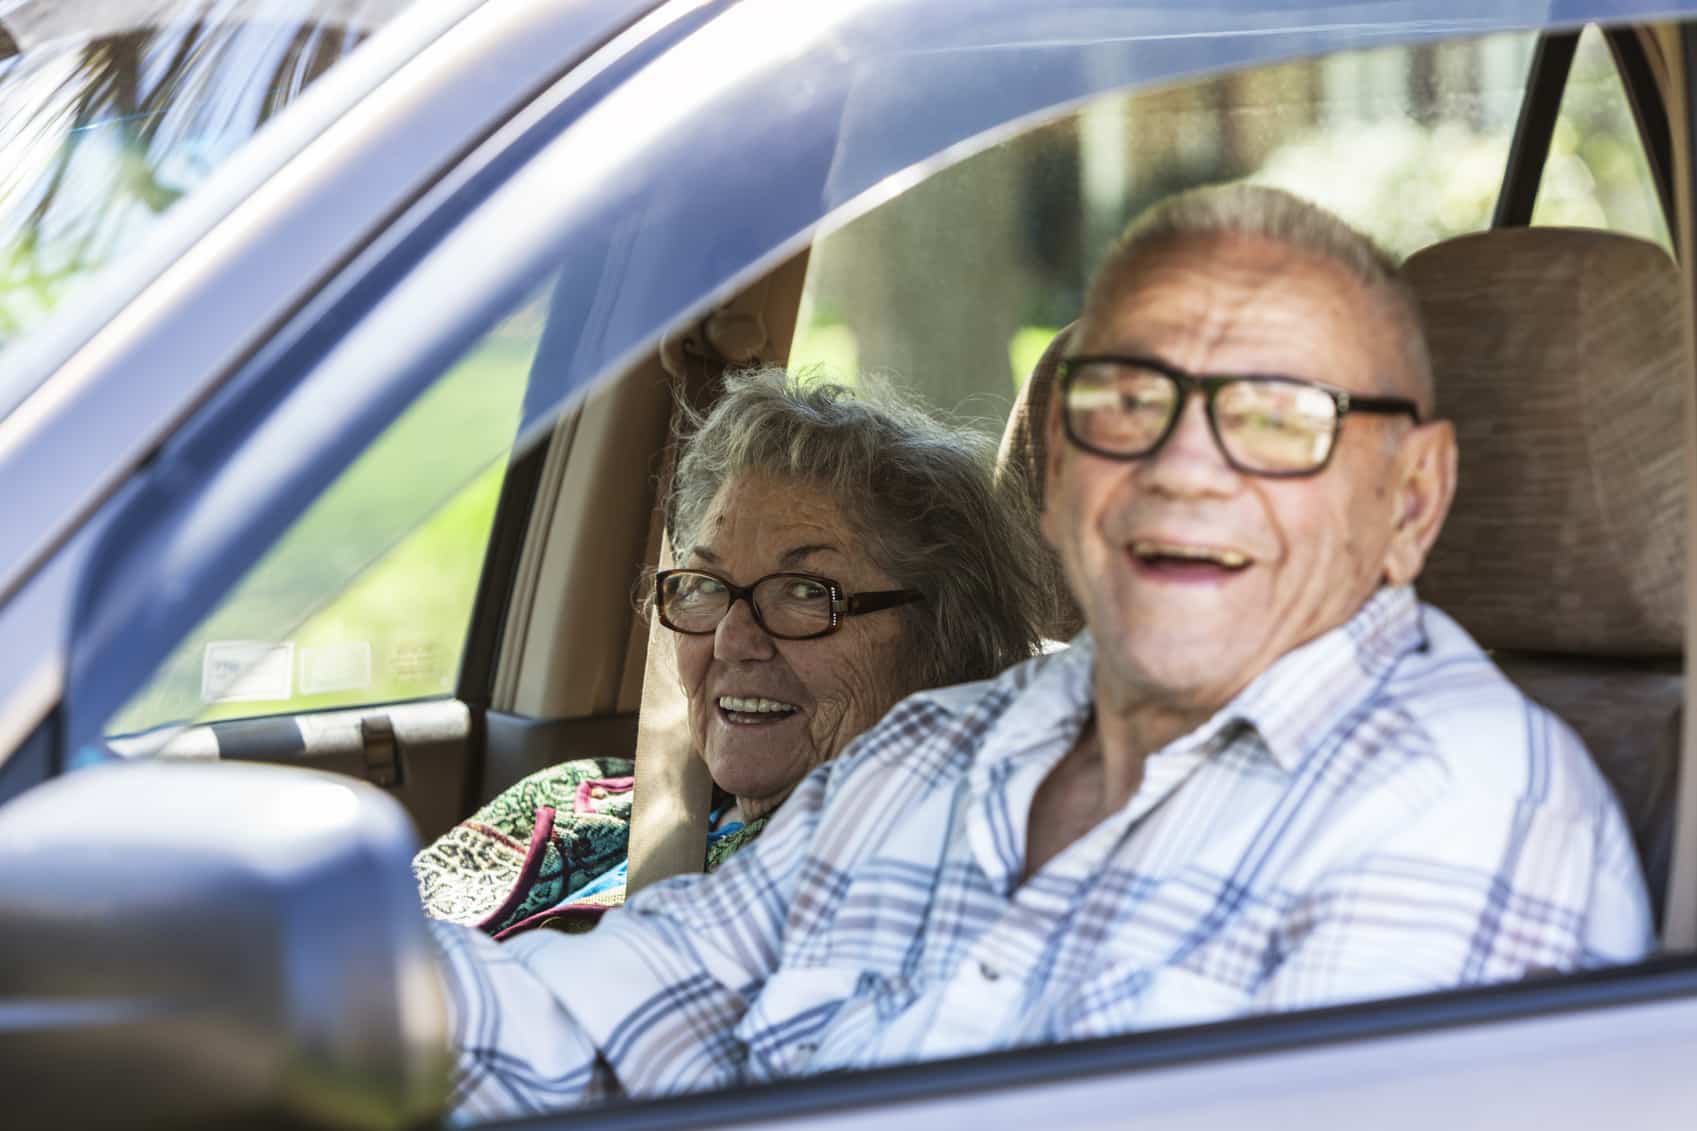 Elderly senior adult married heterosexual couple - 89 and 87 years old - laughing at the camera as they drive past in their trusty, well-worn car. Focus on the woman.